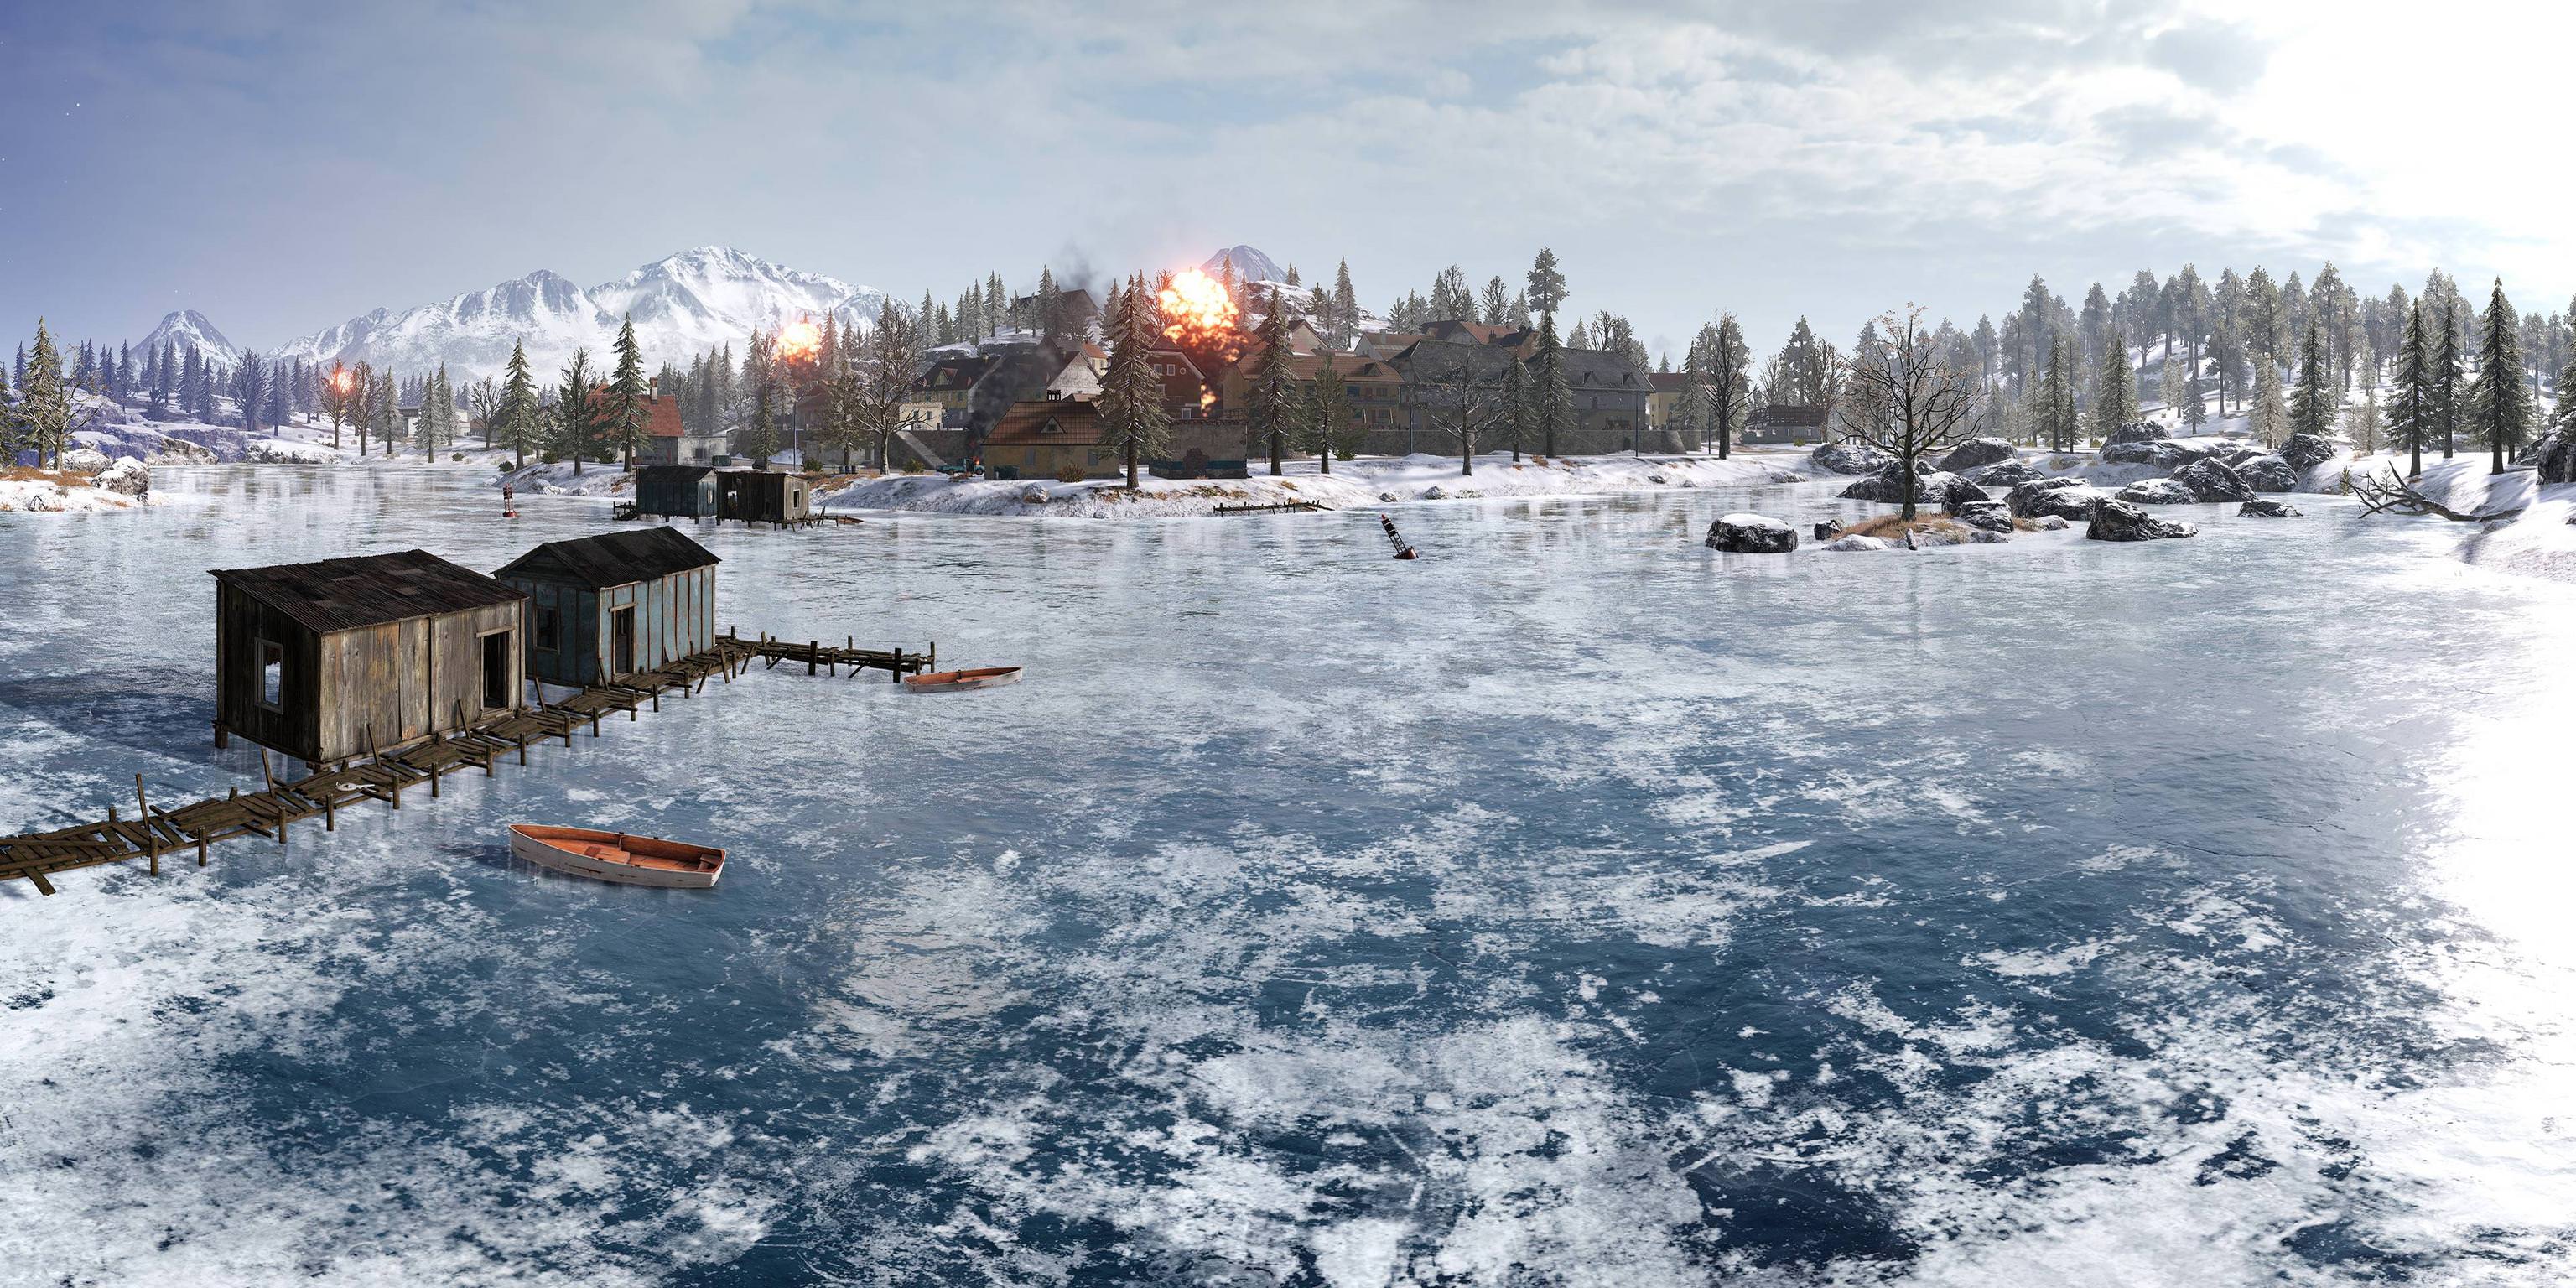 Wallpaper  PUBG winter blue coat backpack forest mountains trees  boots frozen lake snow scopes 1920x1080  MisterNiceGuy  1552451  HD  Wallpapers  WallHere